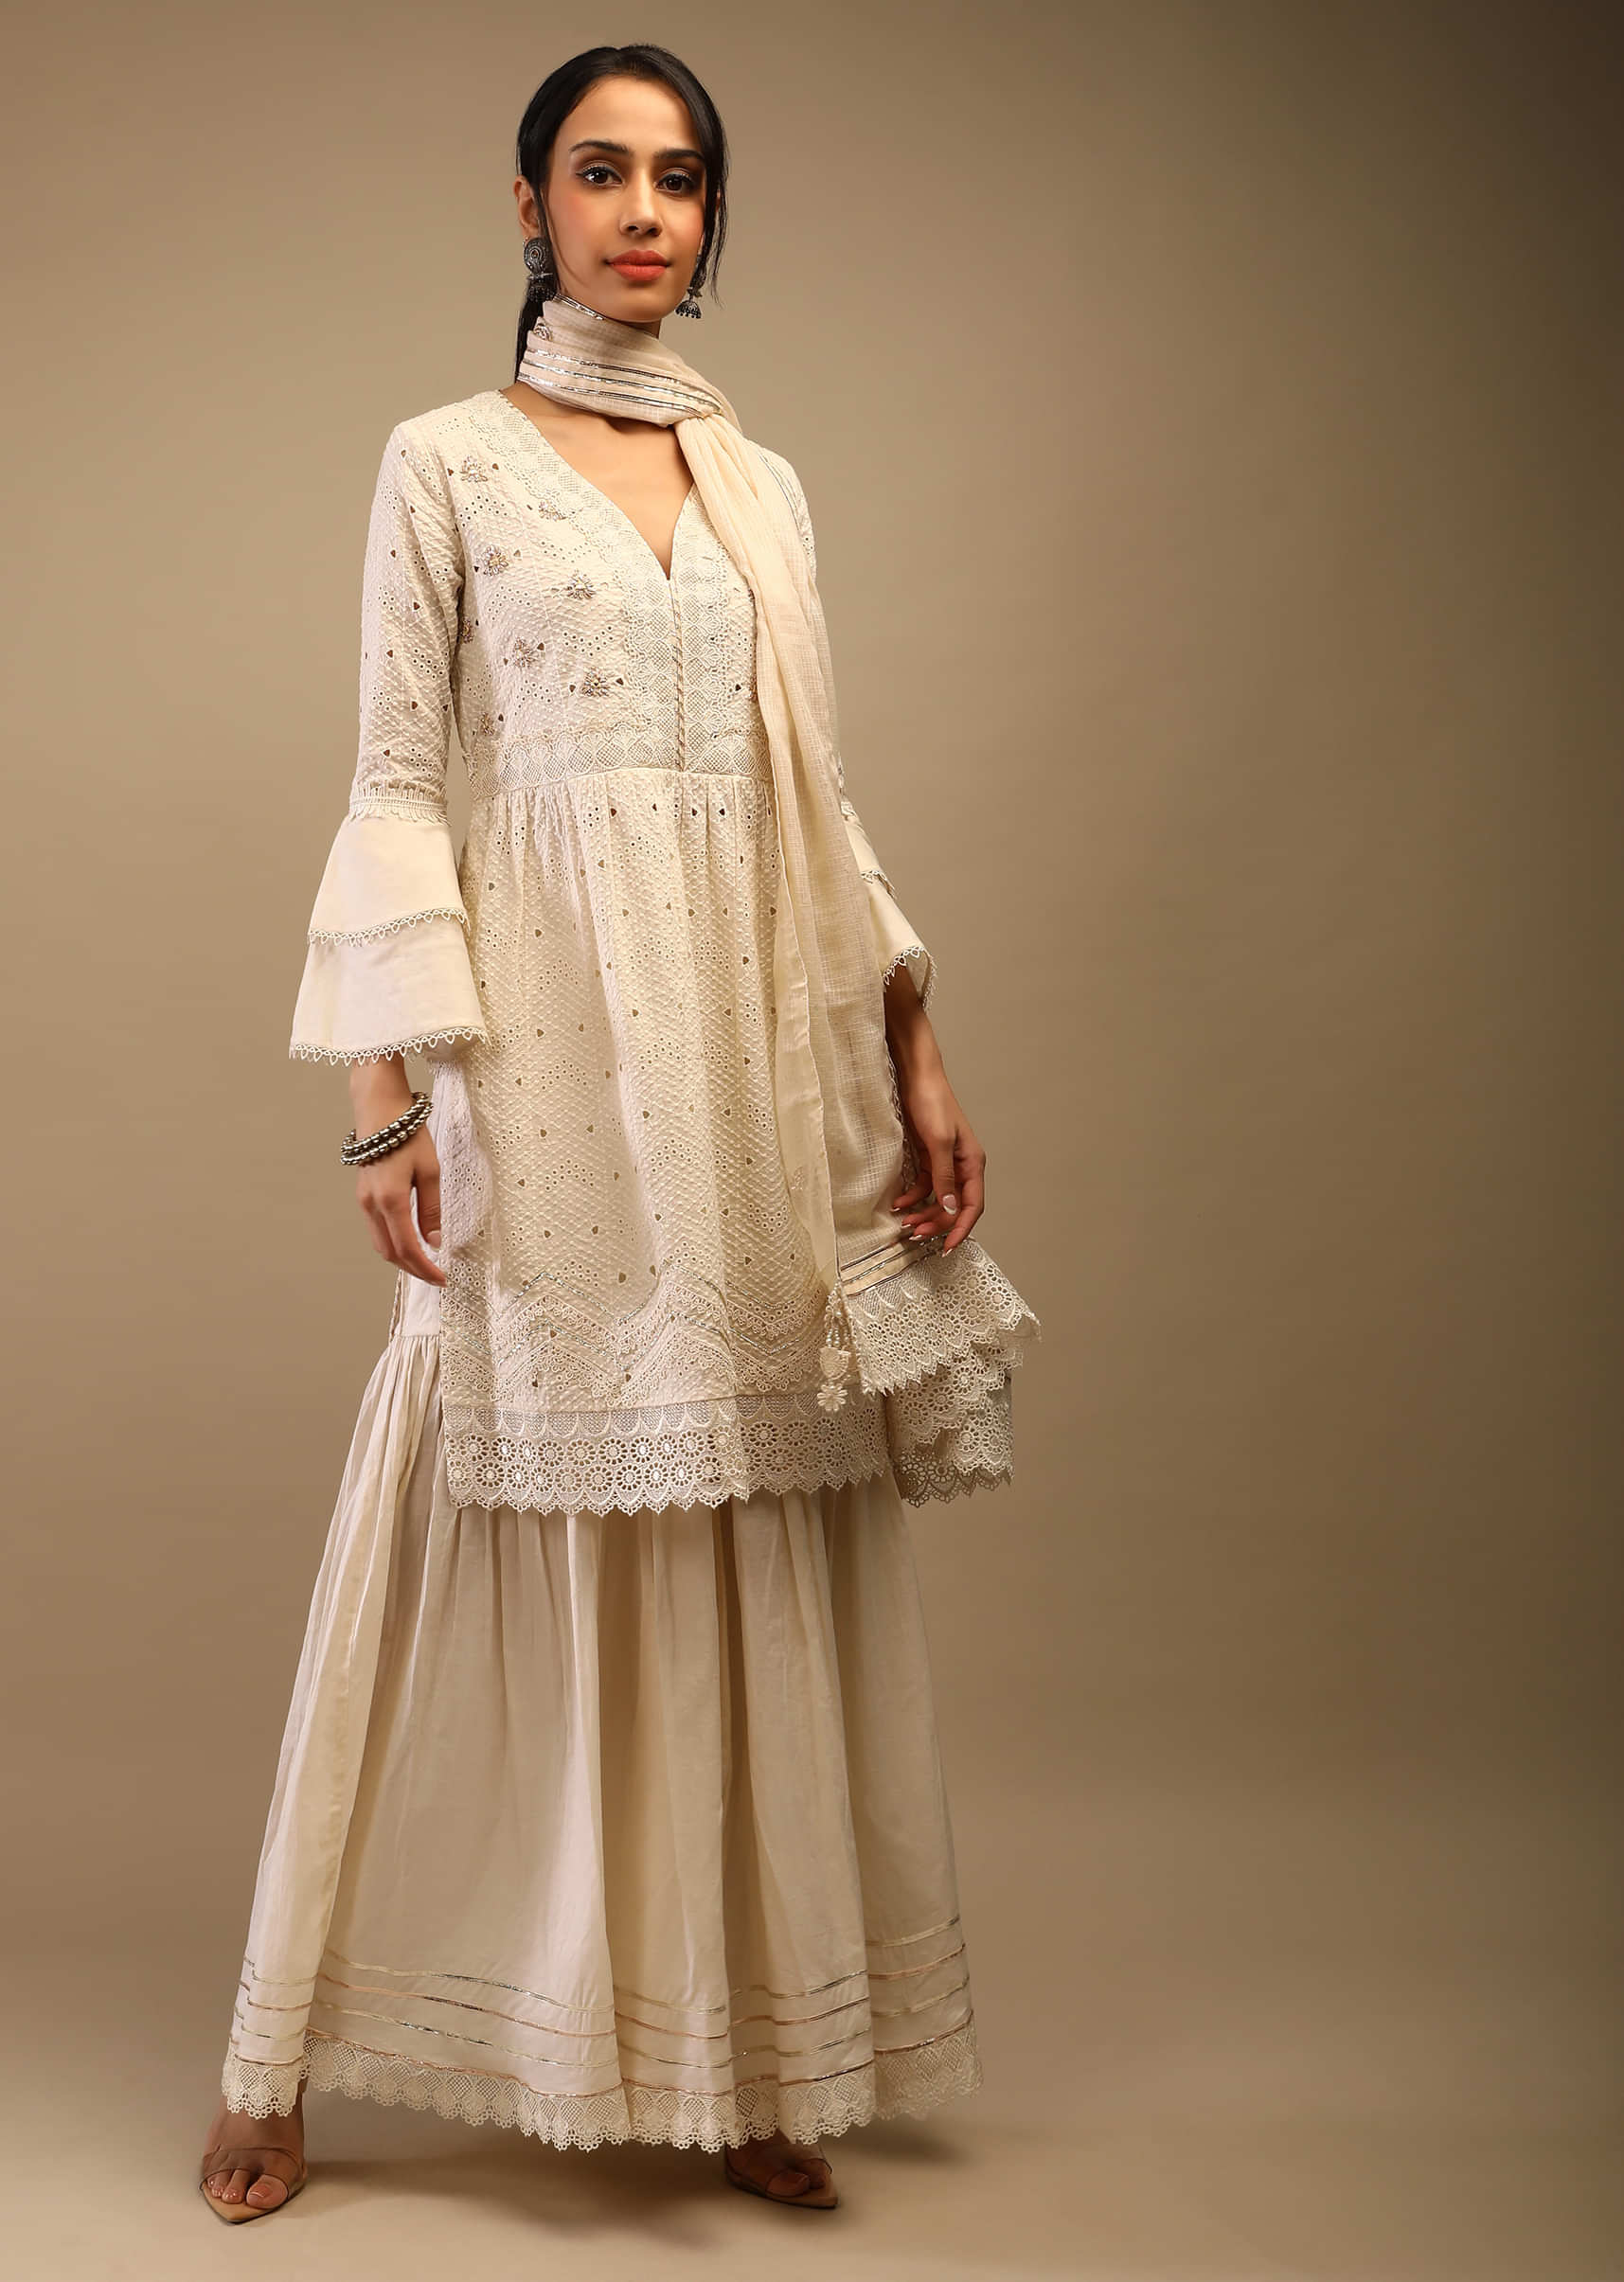 Off White Sharara Suit In Cotton With Thread Cut Work Embroidered Geometric Design And Mirror Accents  